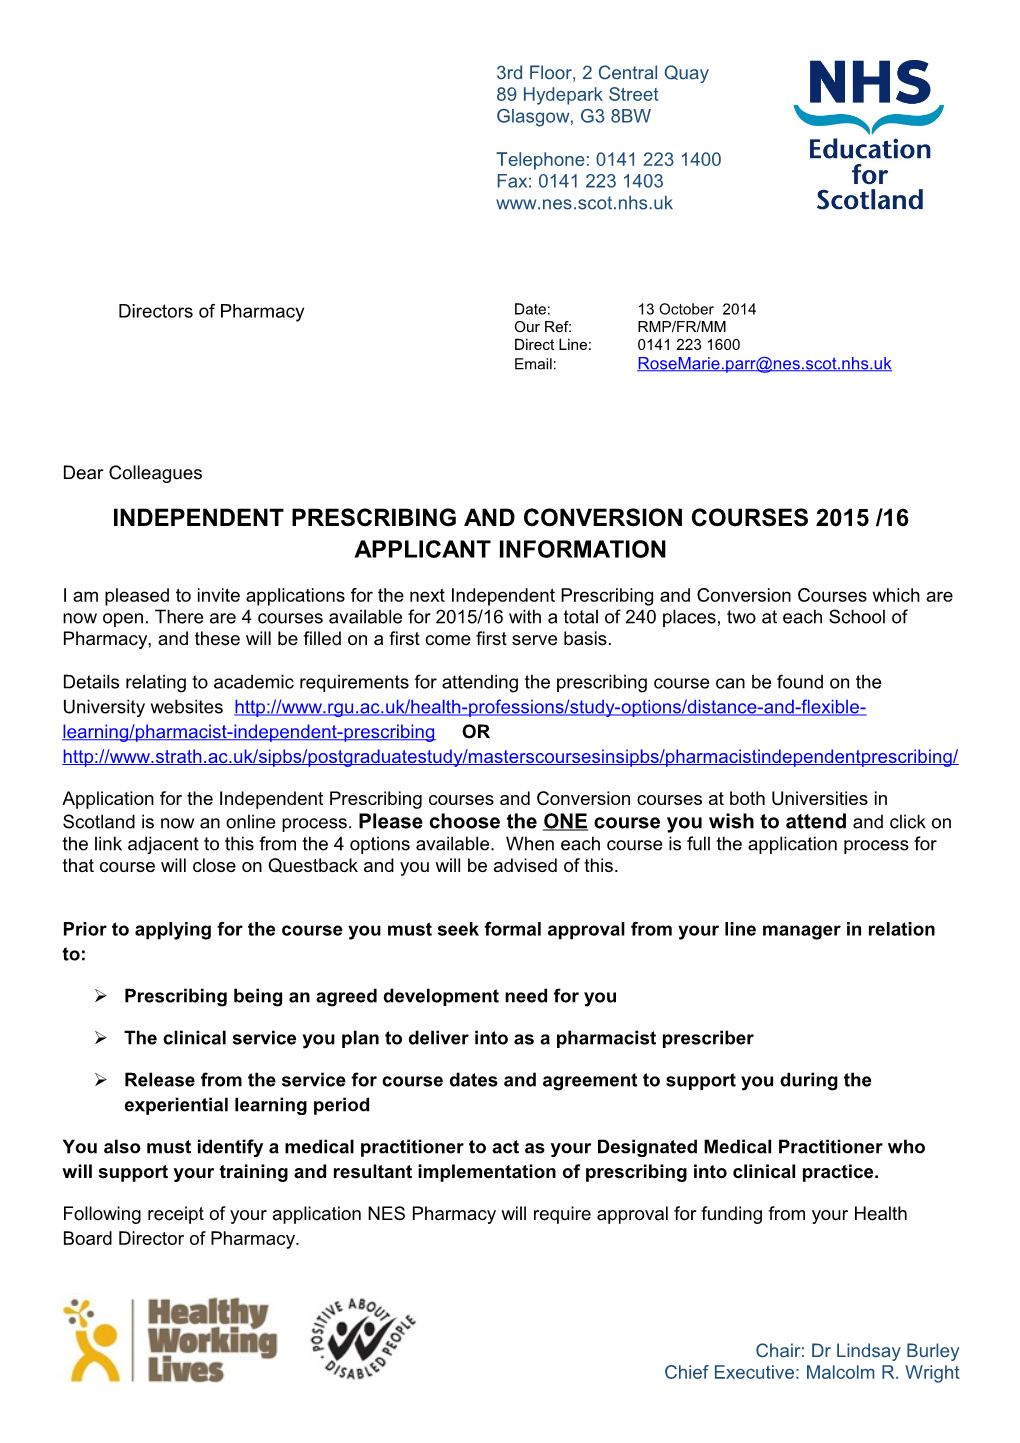 Independent Prescribing and Conversion Courses 2015 /16 Applicant Information